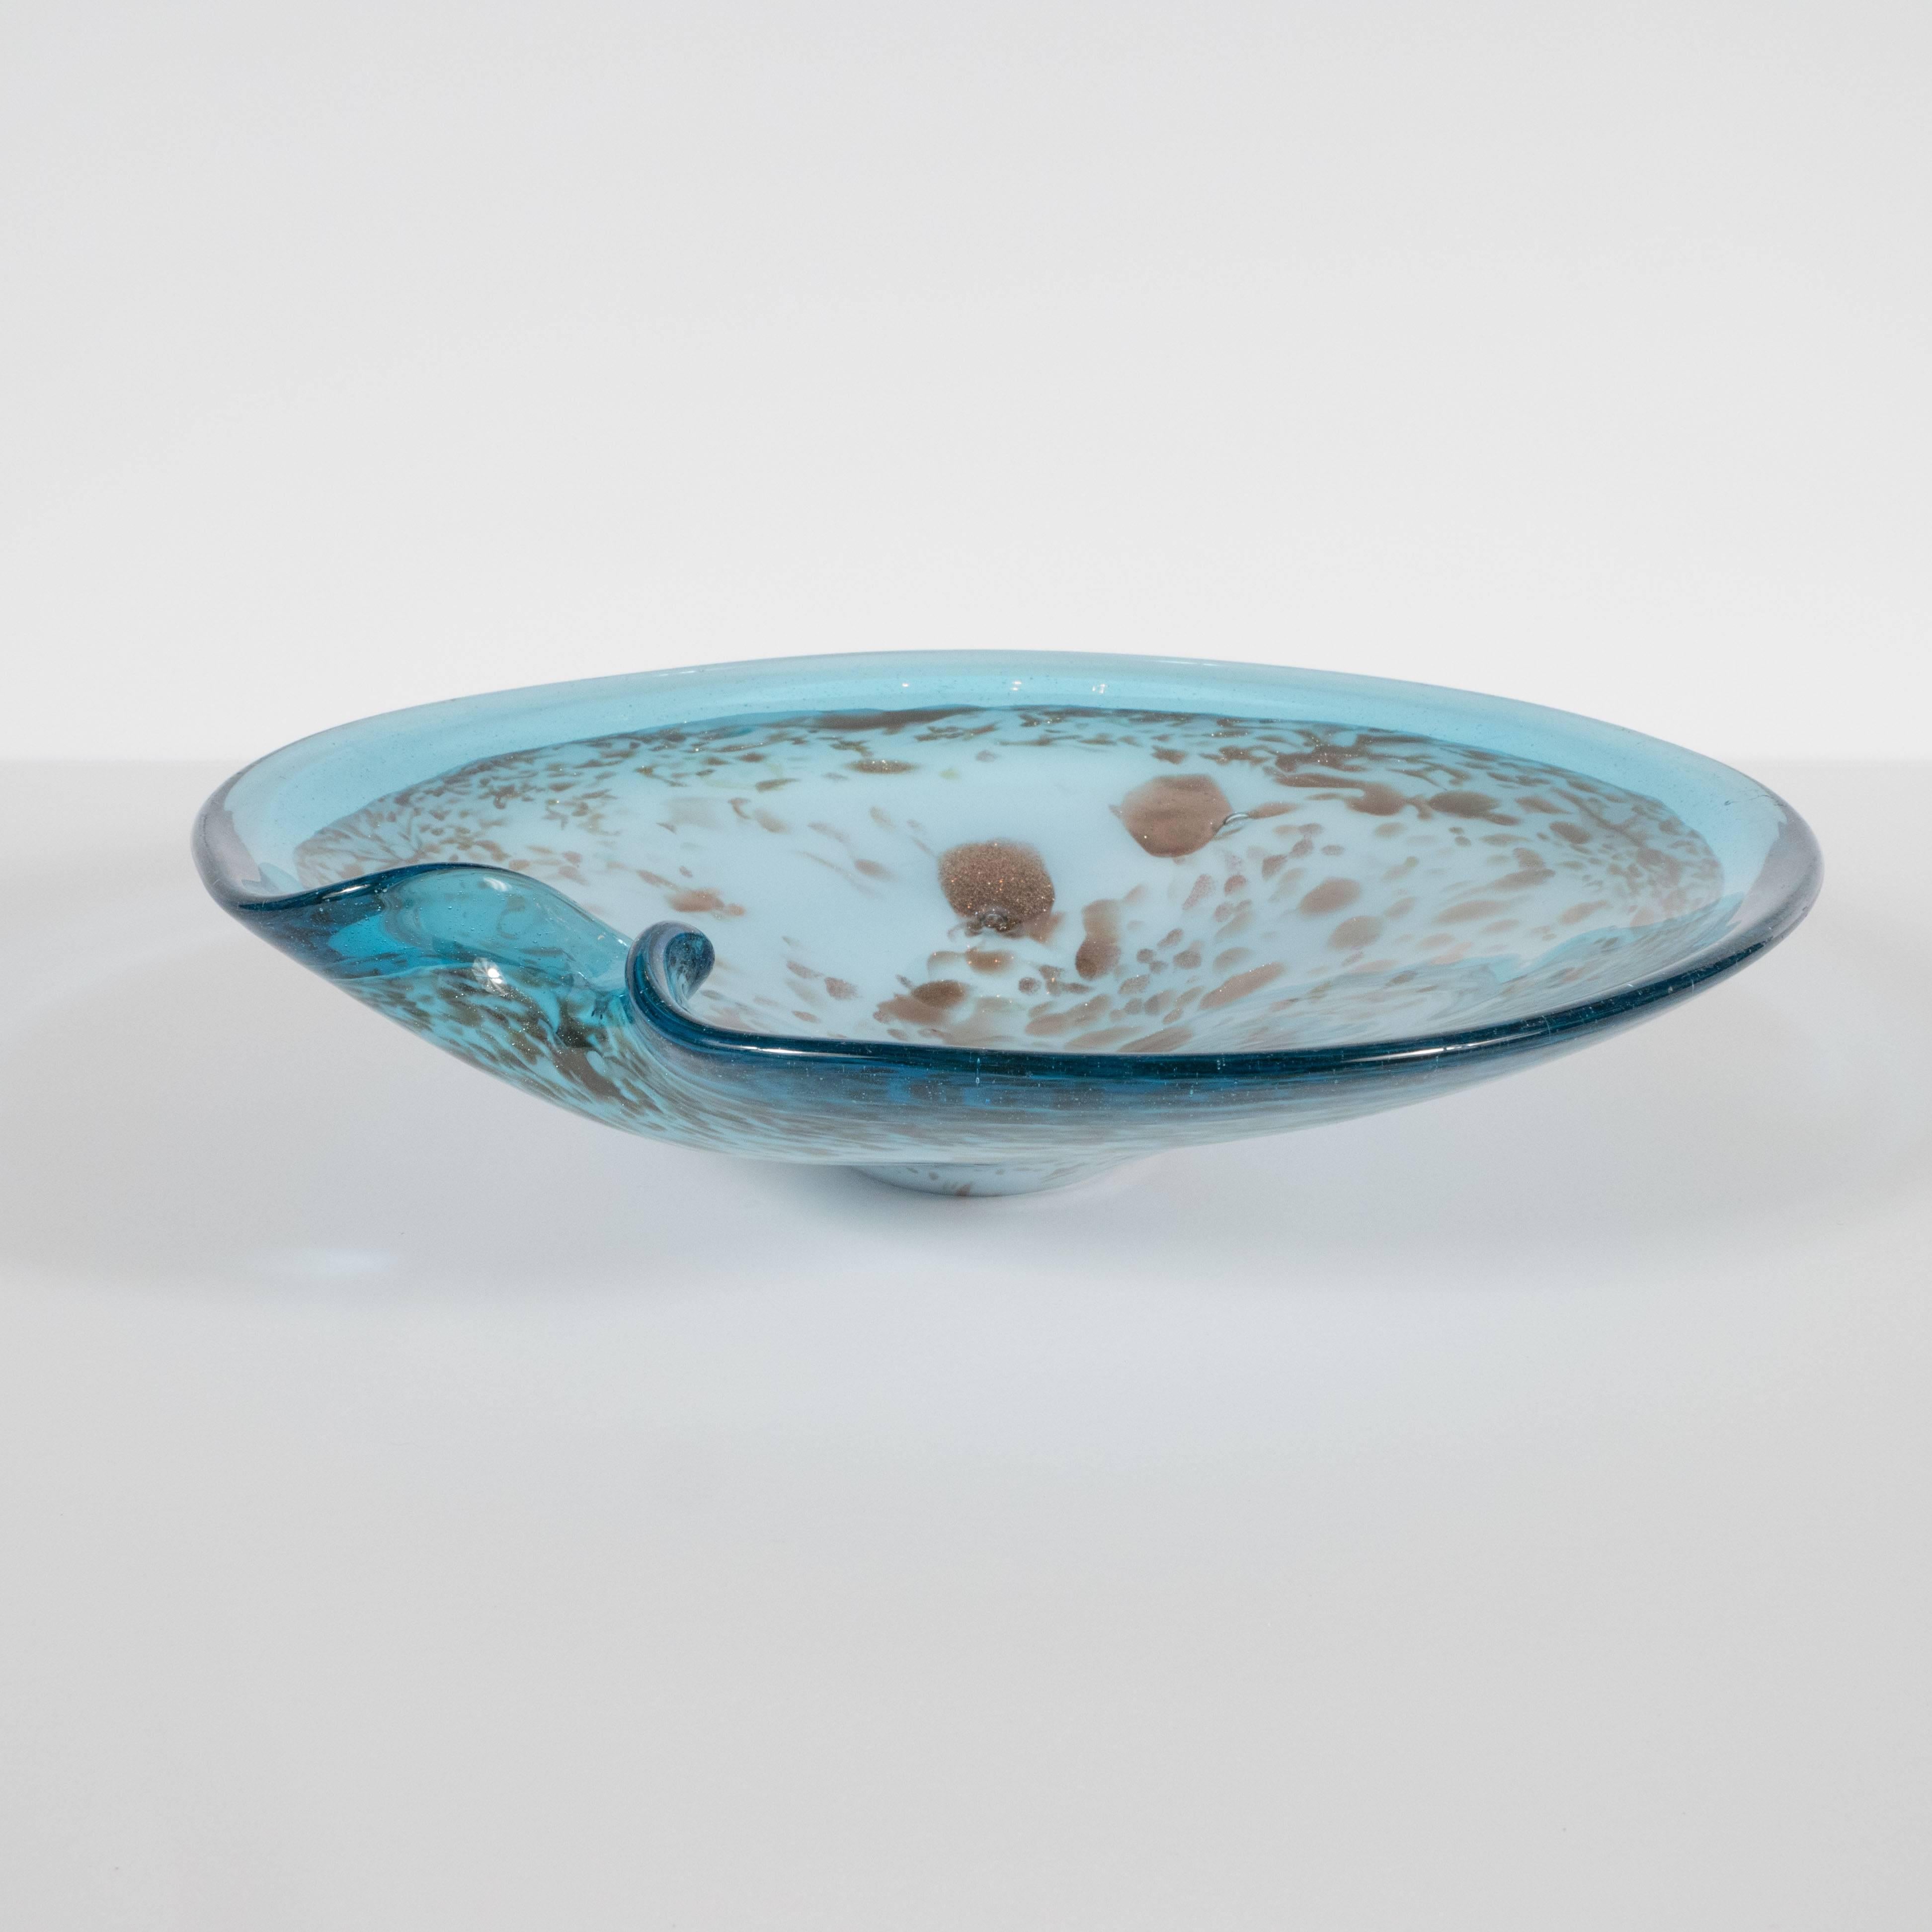 This stunning bowl was handblown, circa 1950, on the fabled Venetian island of Murano Italy. The center, realized in a Tiffany blue, teems with organic iridescent rose gold forms. Translucent azure glass with an abundance of miniscule bubbles